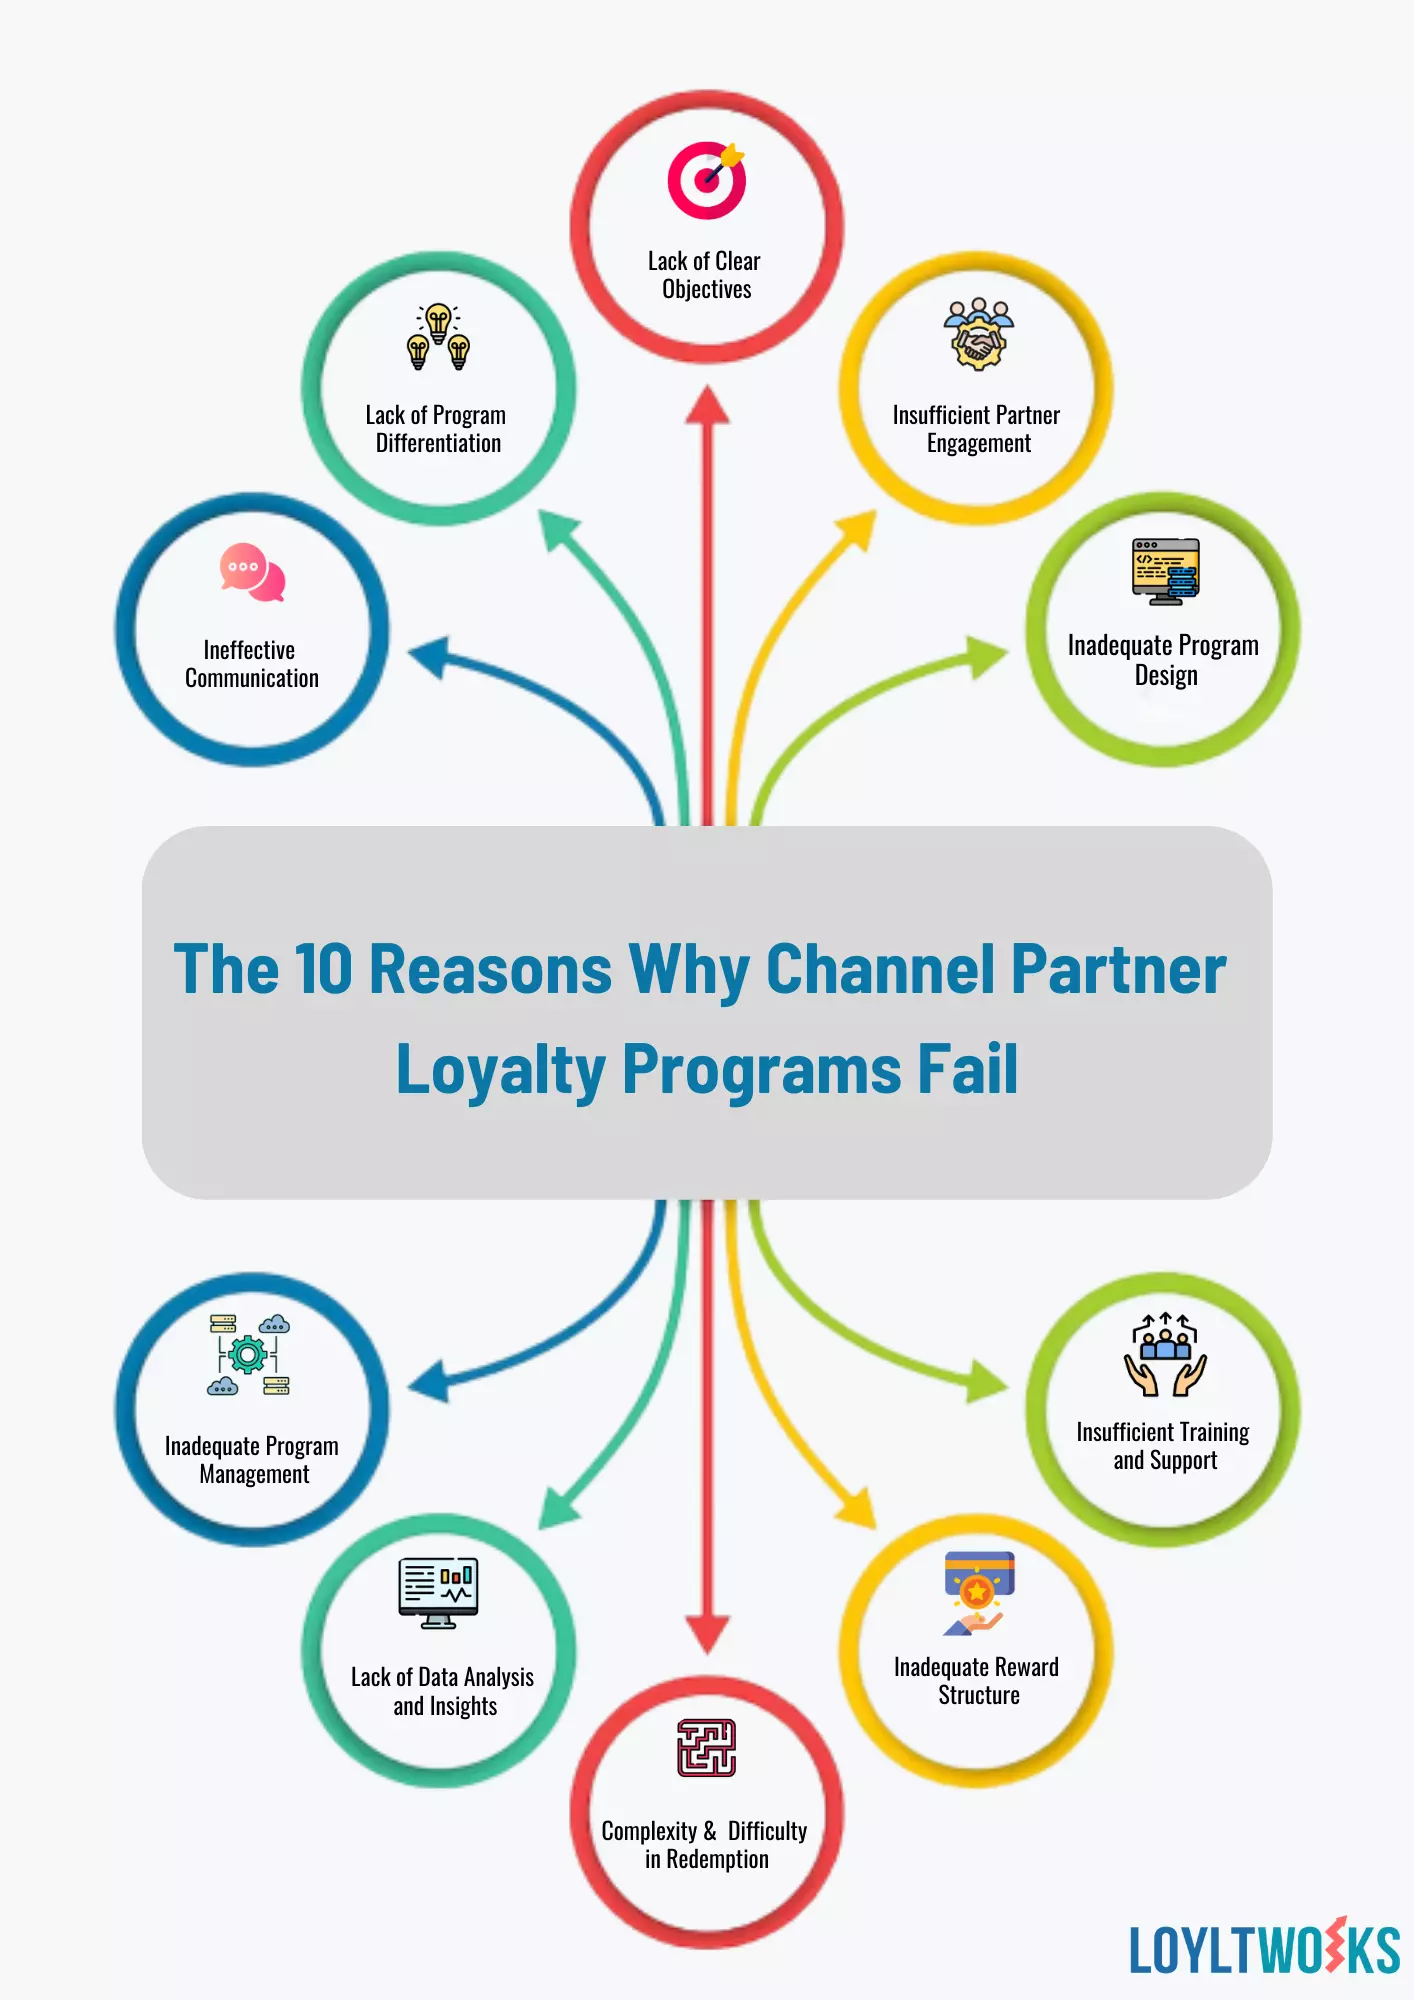 Why Channel Partner Loyalty Programs Fail